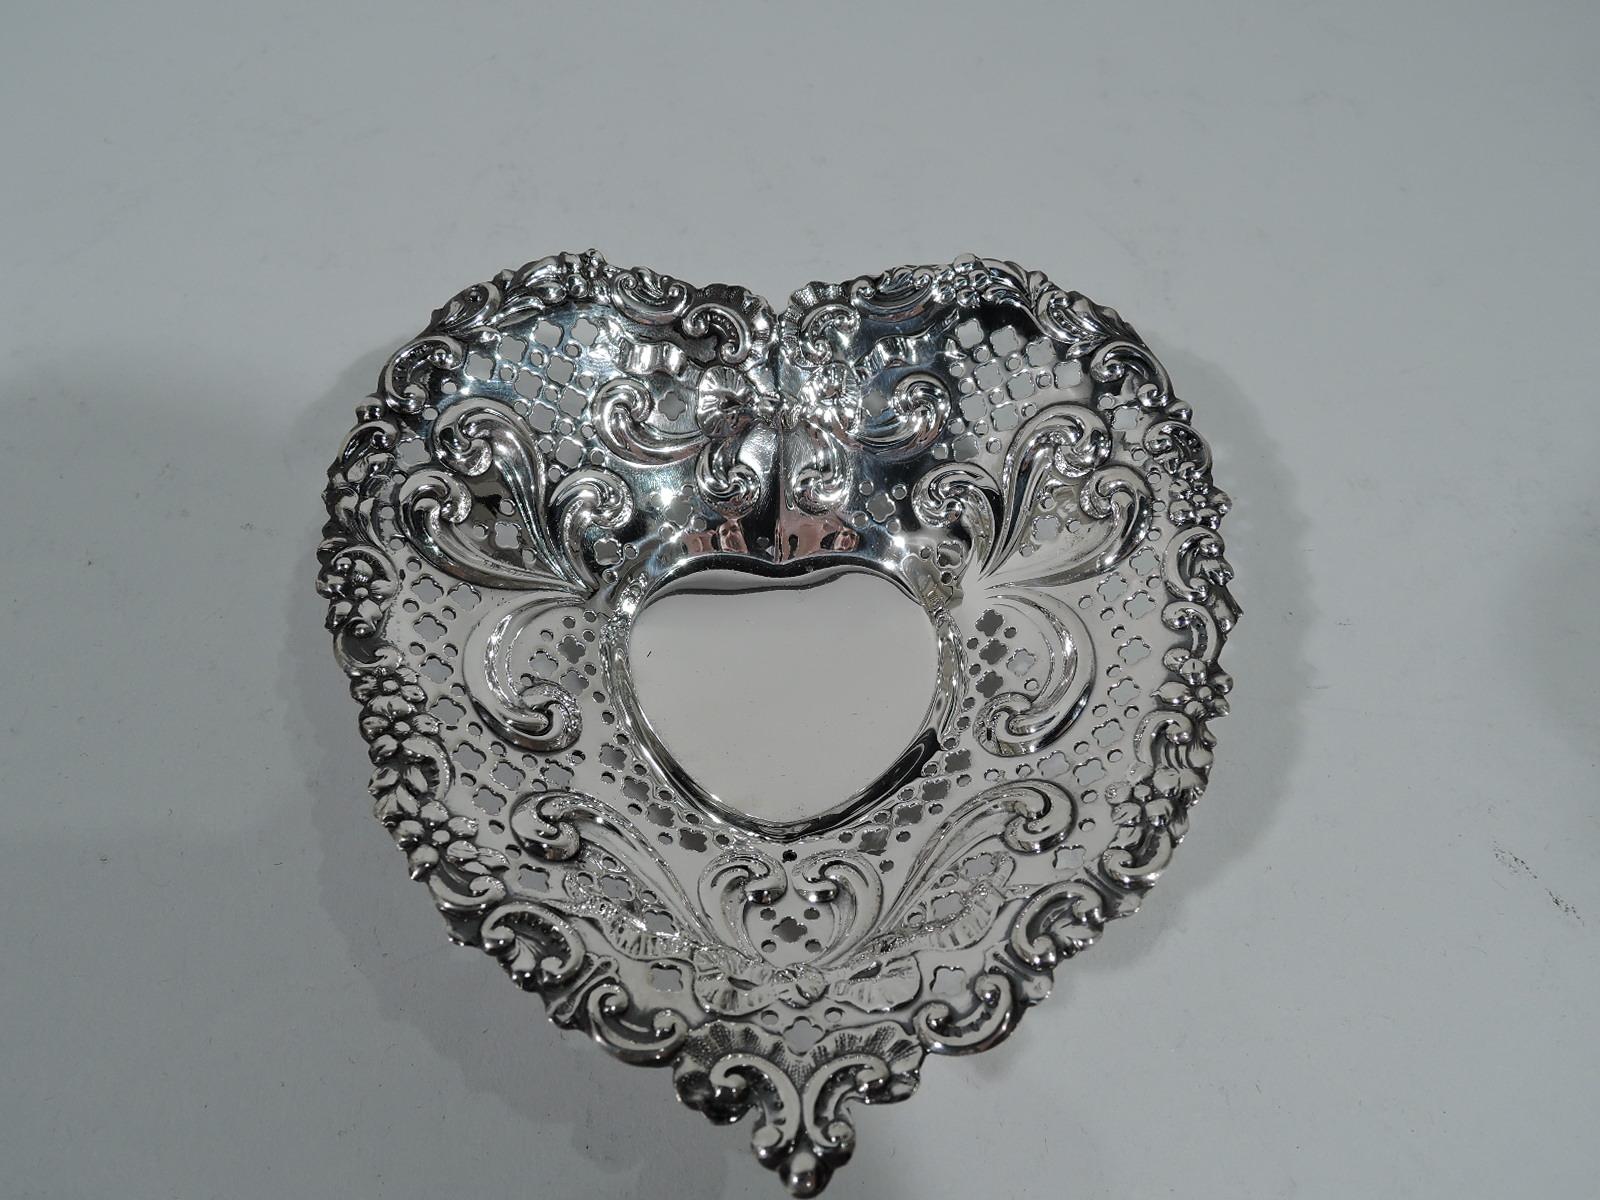 Charming old-fashioned sterling silver heart dish. Made by Gorham in Providence. Solid well and wide tapering sides with embossed bow-tied ribbon and scrolls and pierced circles and quatrefoils. Irregular rim with scrolls and flowers. Three ball